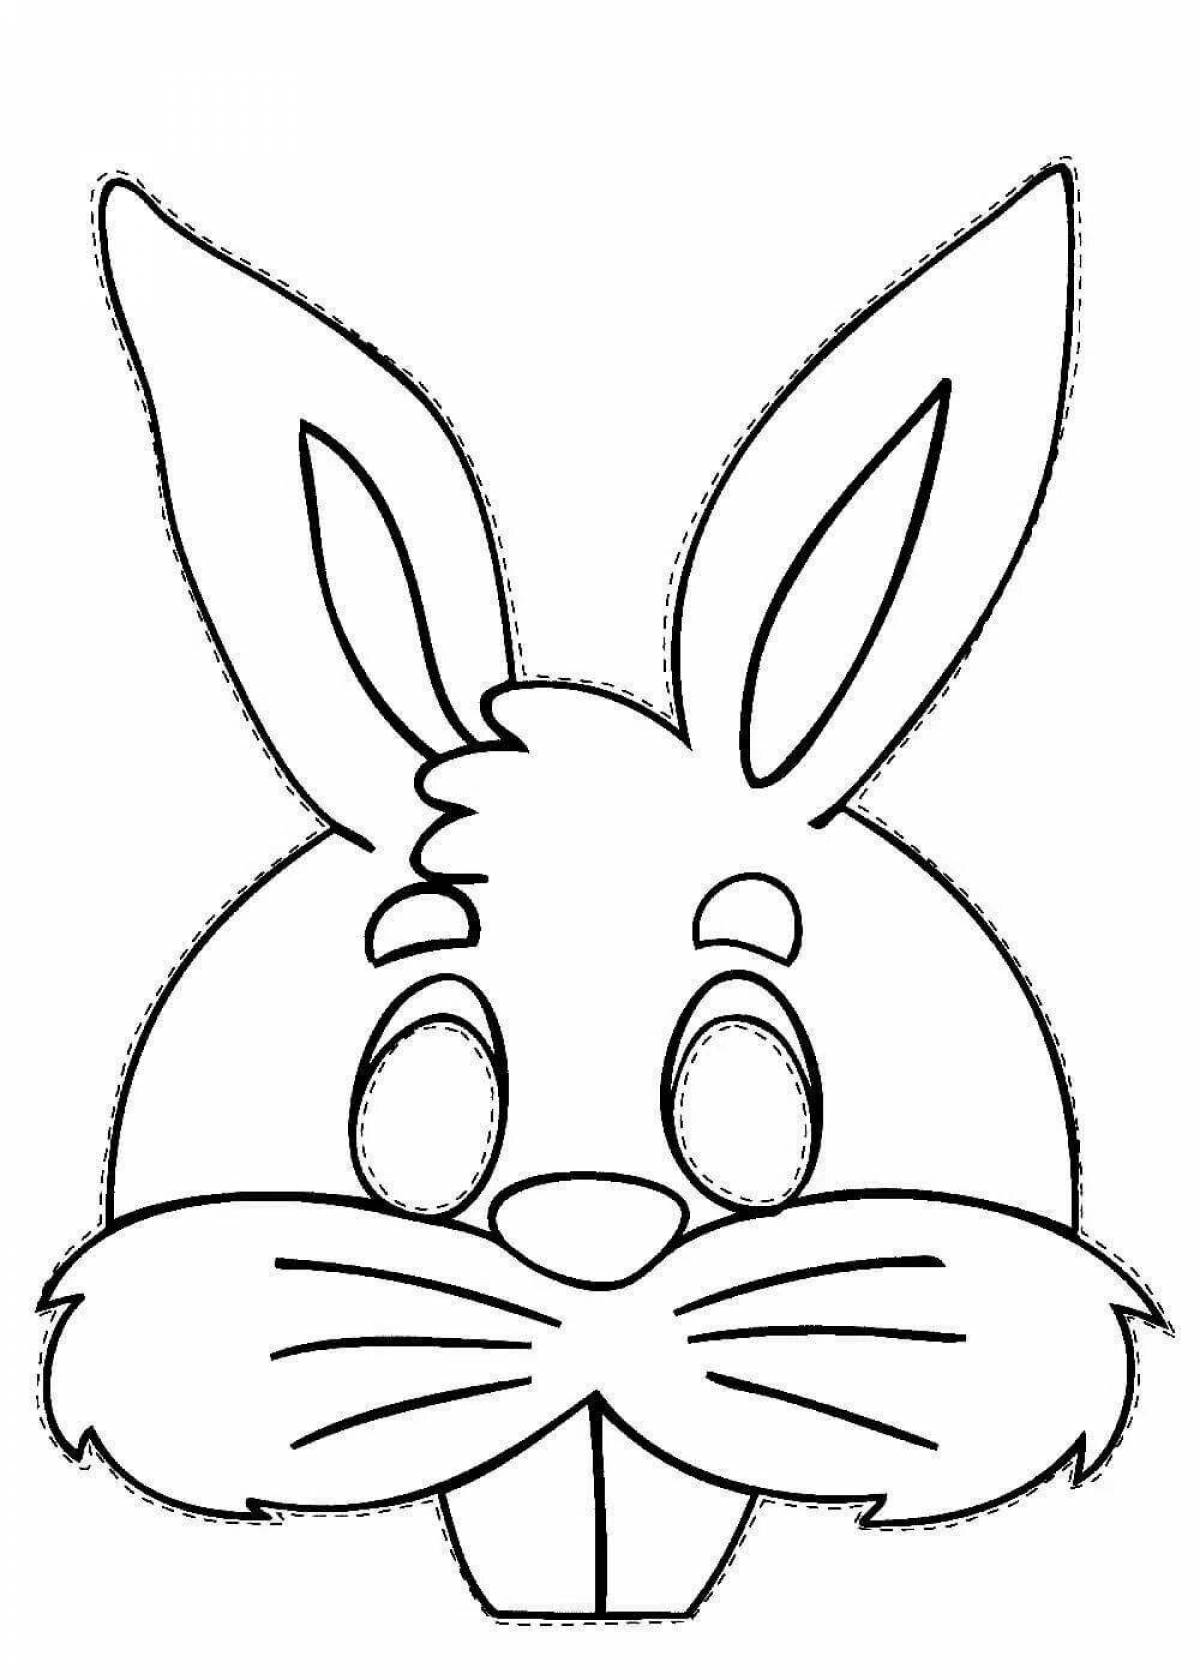 Wiggly coloring page bunny face